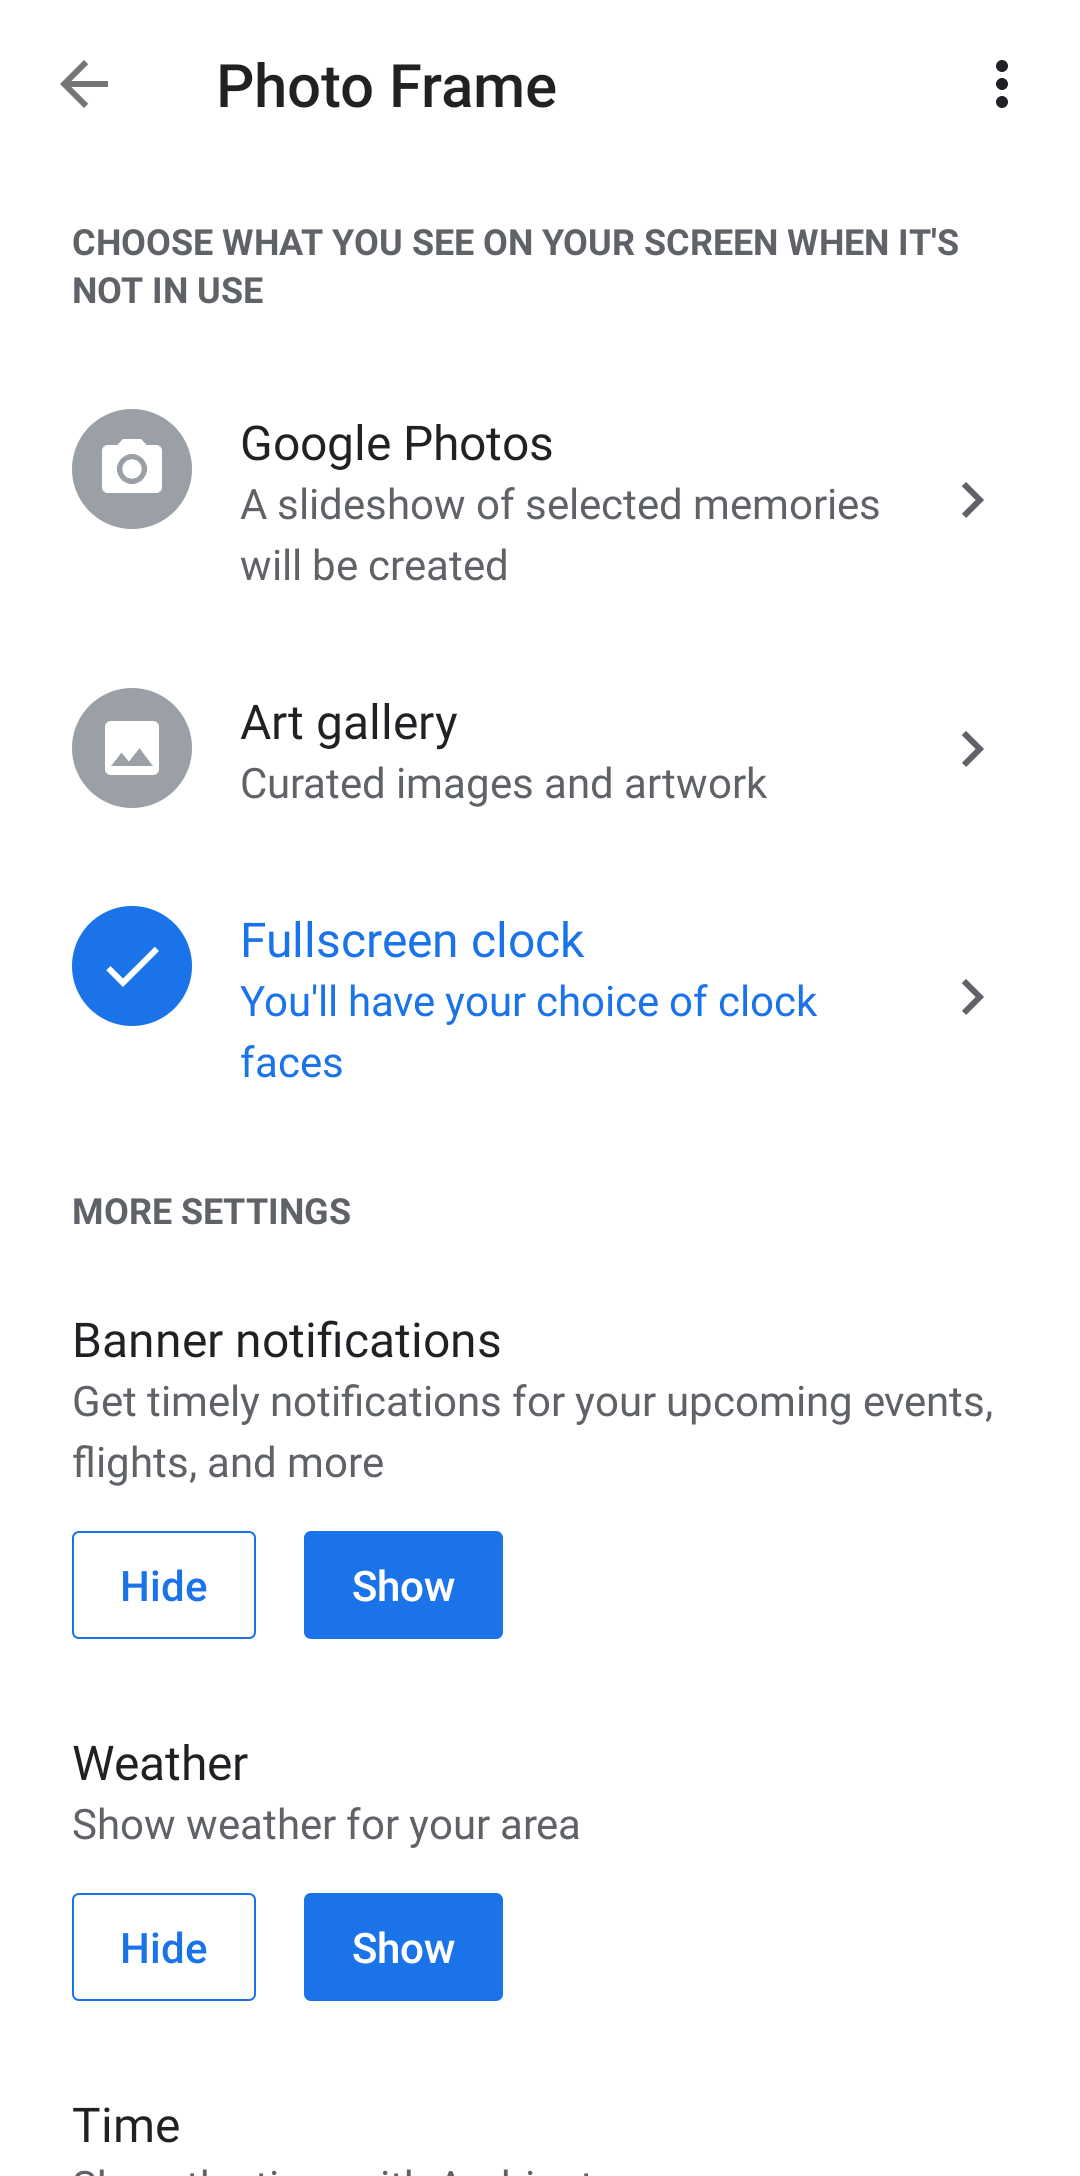 Screenshot shows the Photo Frame settings page in the Google Home app.